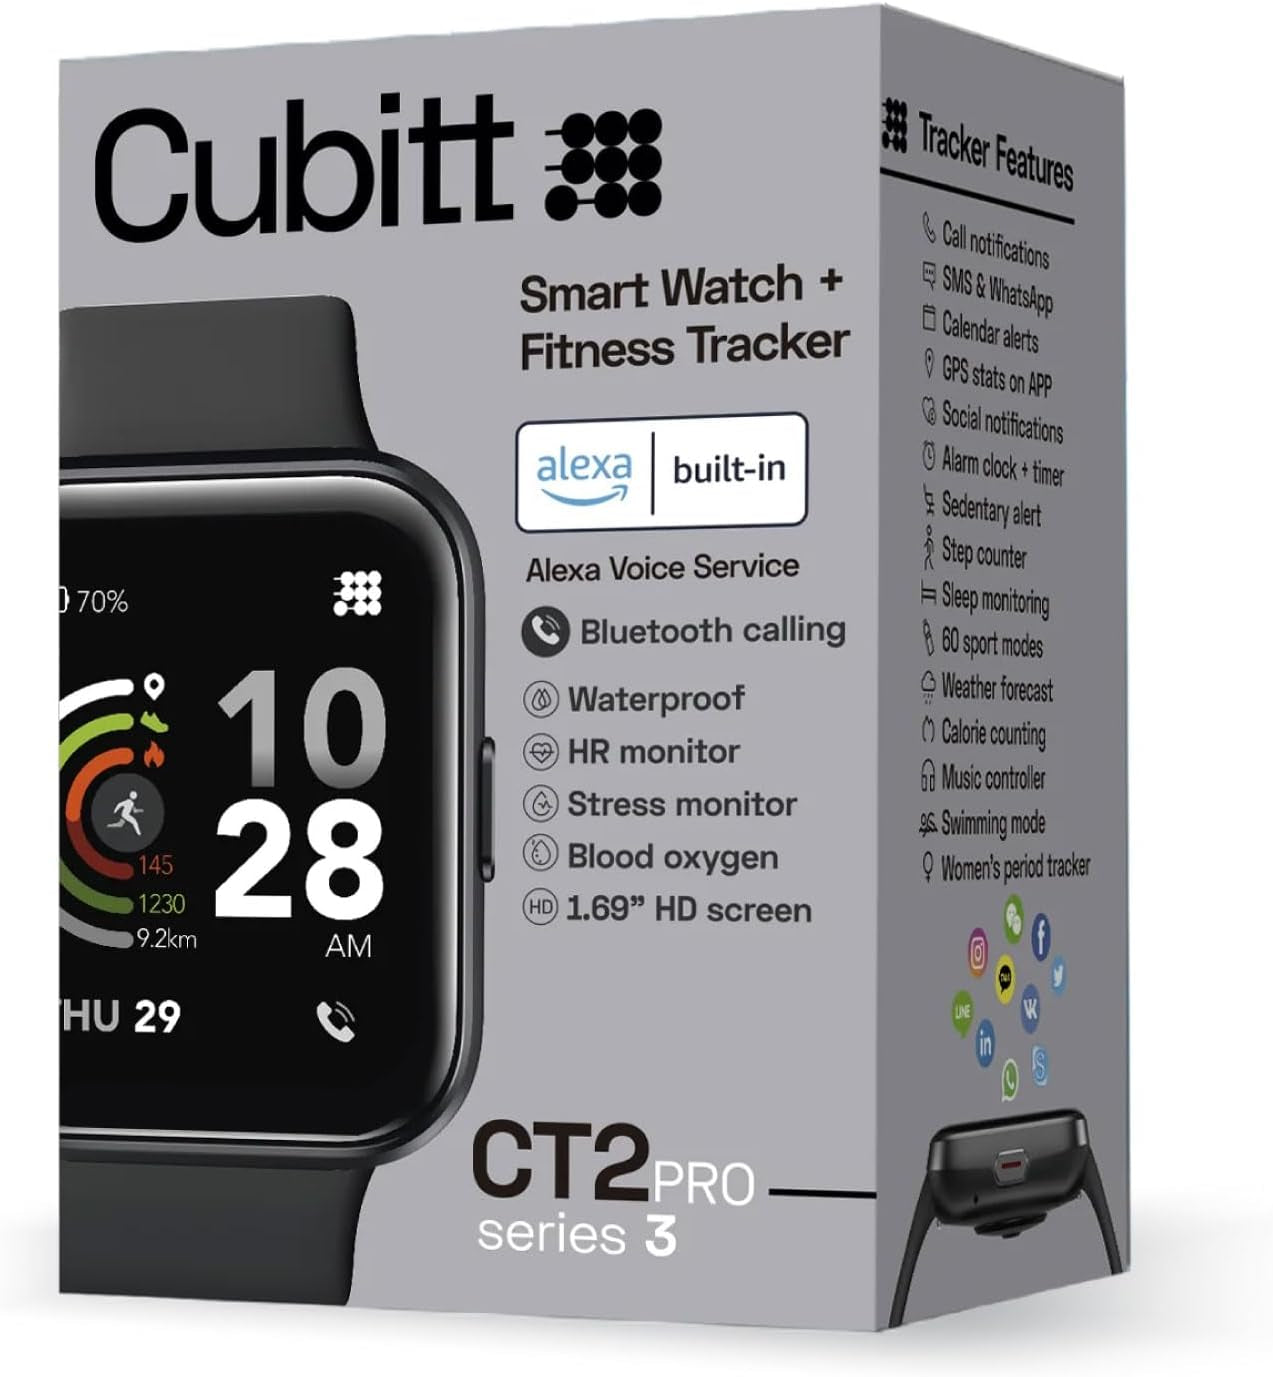 Cubitt Ct2Pro Series 3 Smart Watch with 1.69" Touch Screen, Fitness Tracker with Alexa Built-In, Bluetooth Calling, Blood Oxygen, Heart Rate, Stress and Sleep Monitor, Waterproof, Step Counter